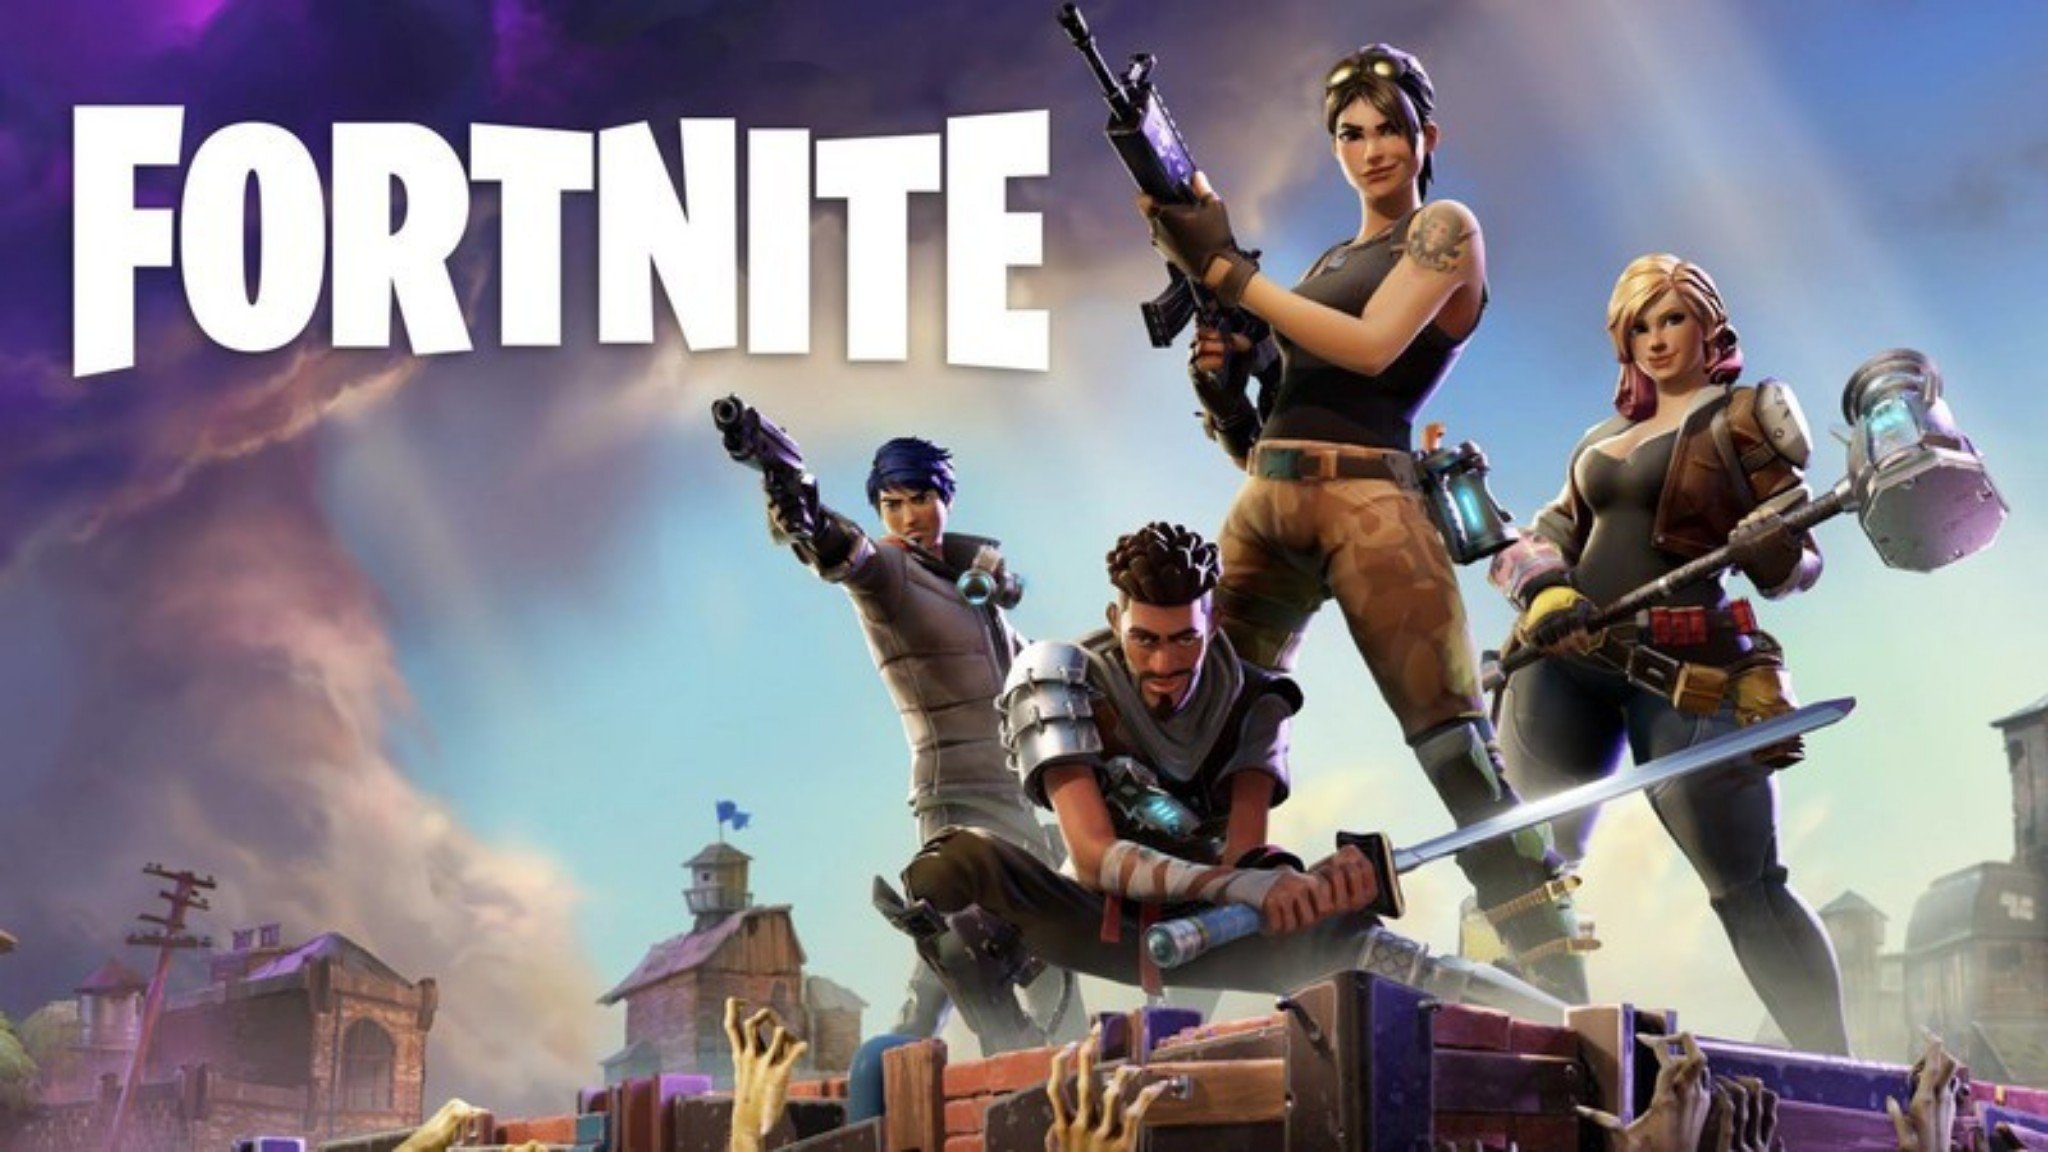 Is Fortnight free for PS4? - Quora